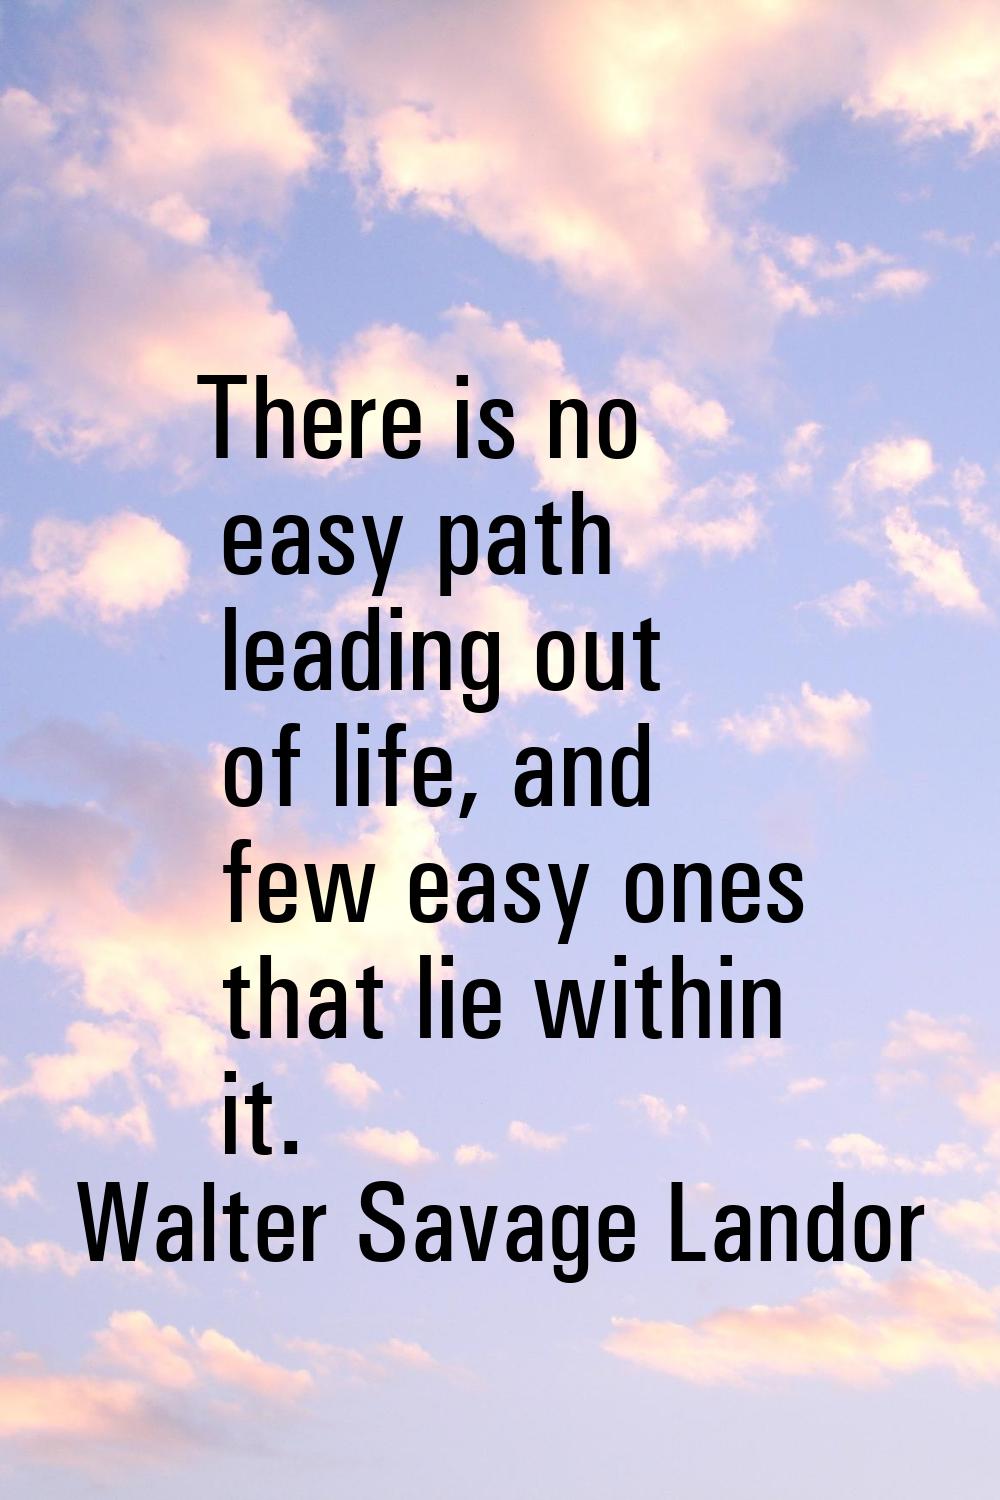 There is no easy path leading out of life, and few easy ones that lie within it.